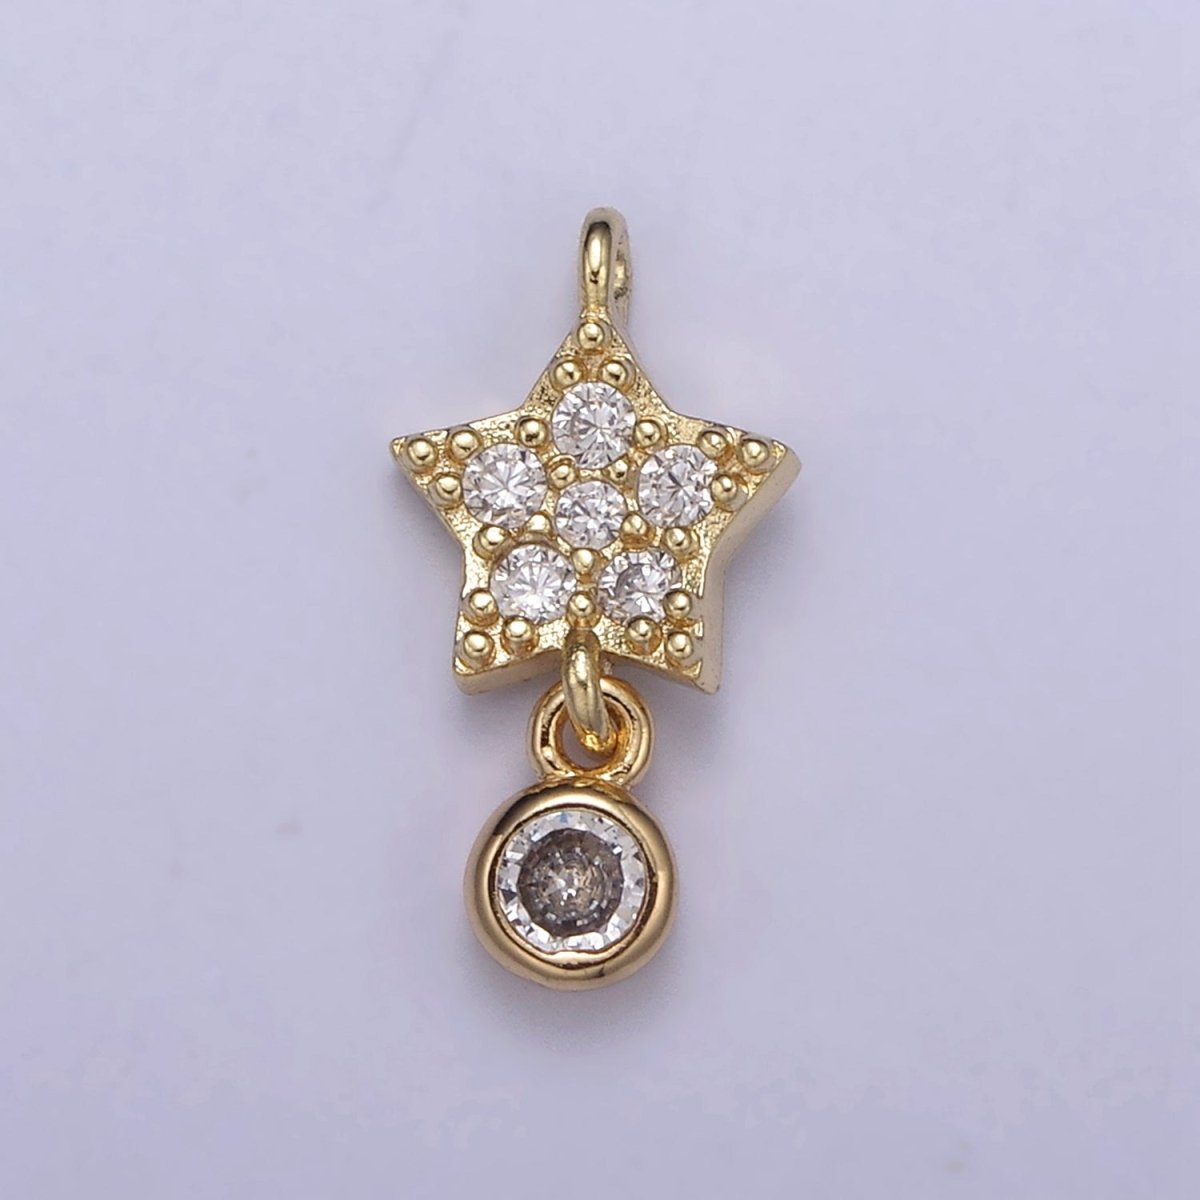 Mini Star Charms, Micro Pave Celestial Pendant Jewelry 14K Gold Filled Dangle Charm Add on Pendant N-417 - DLUXCA